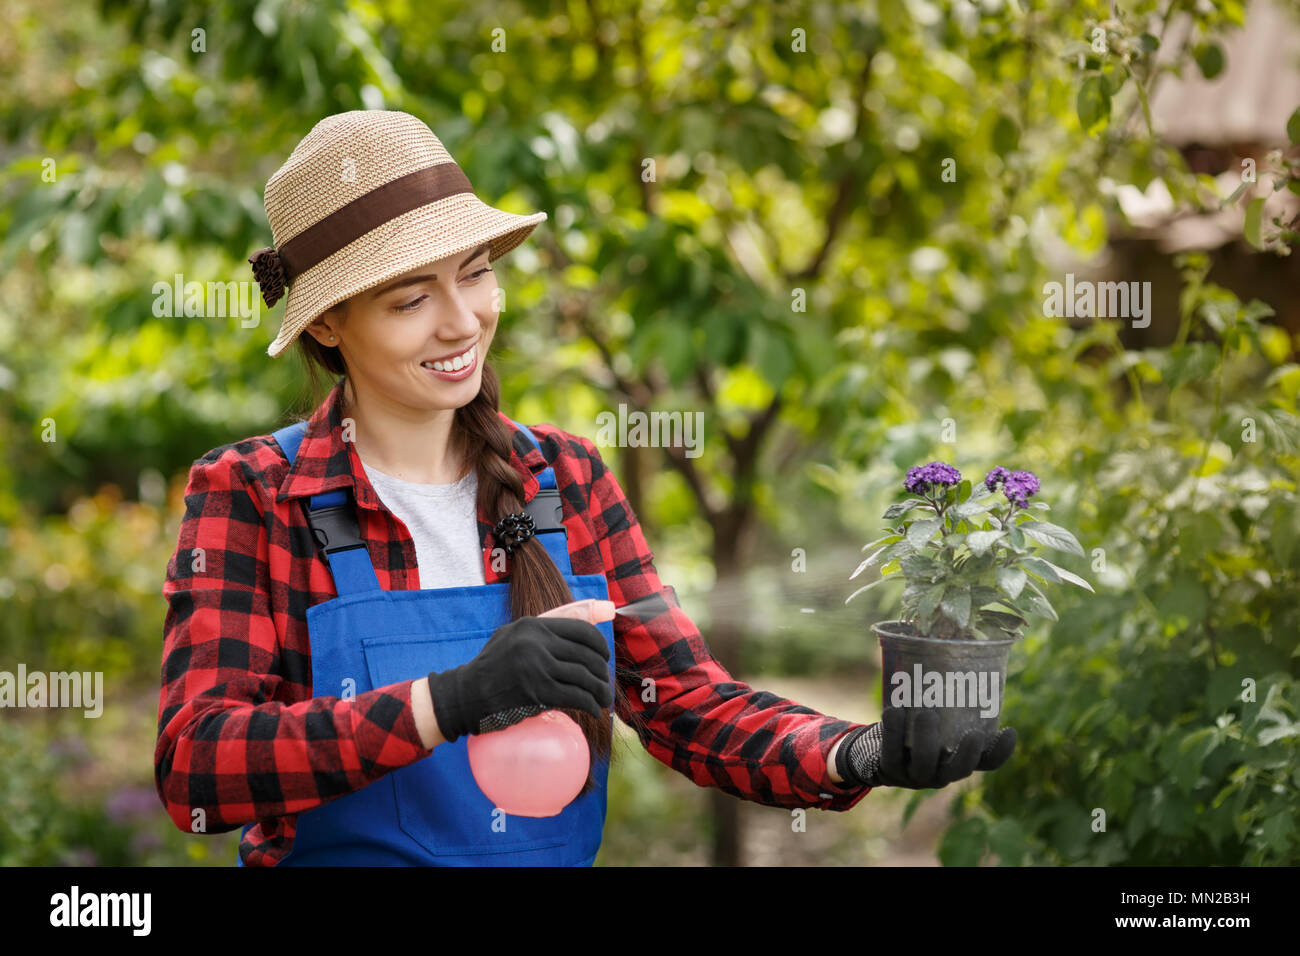 gardener spraying pesticide or water on flowers in pot Stock Photo